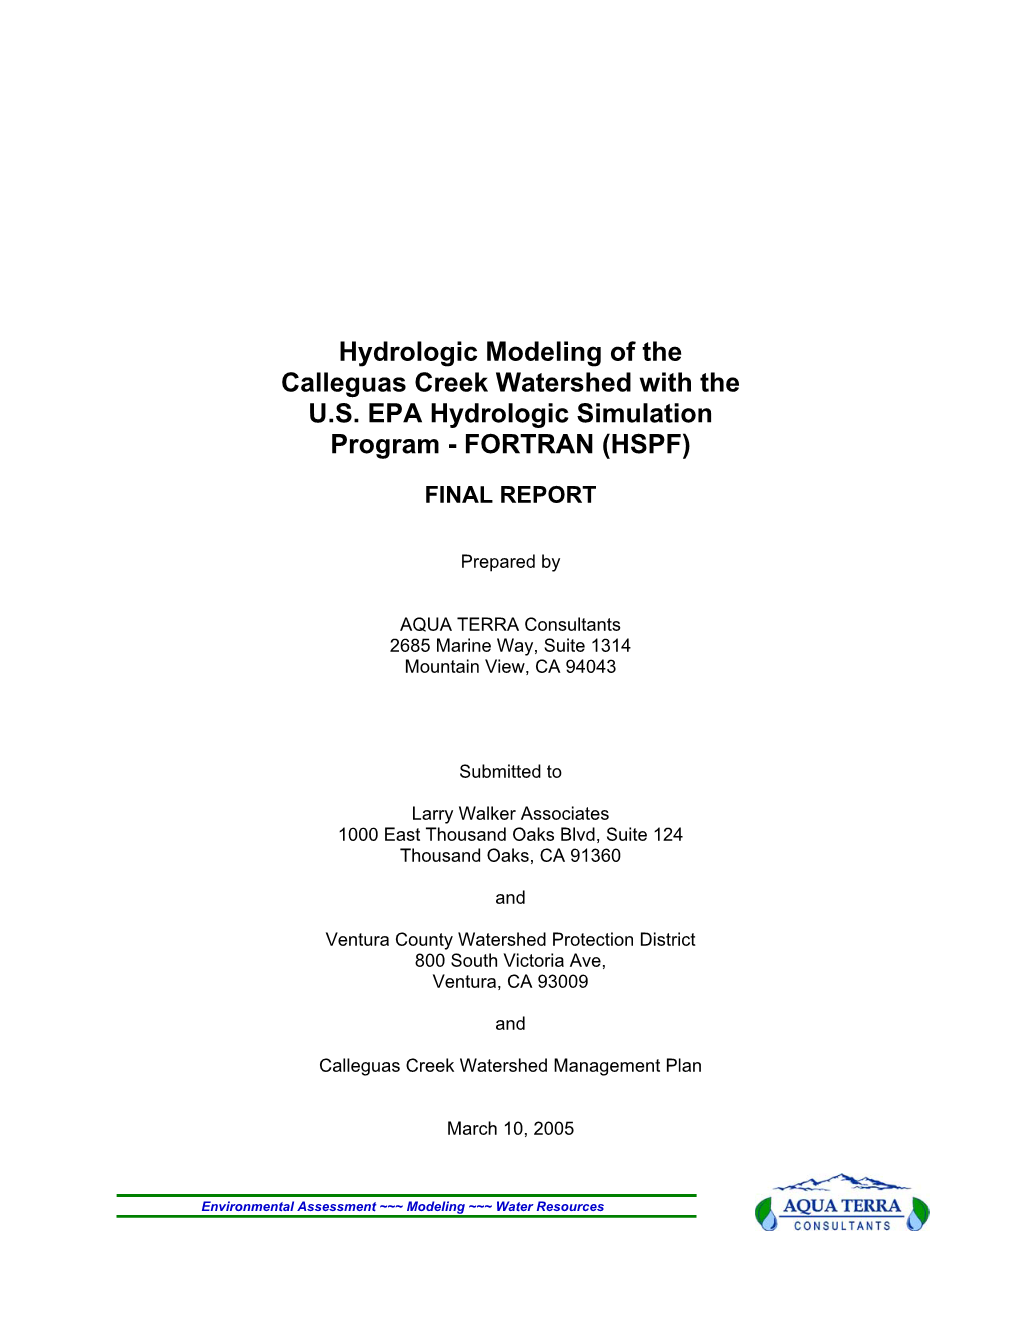 Hydrologic Modeling of the Calleguas Creek Watershed with the US EPA